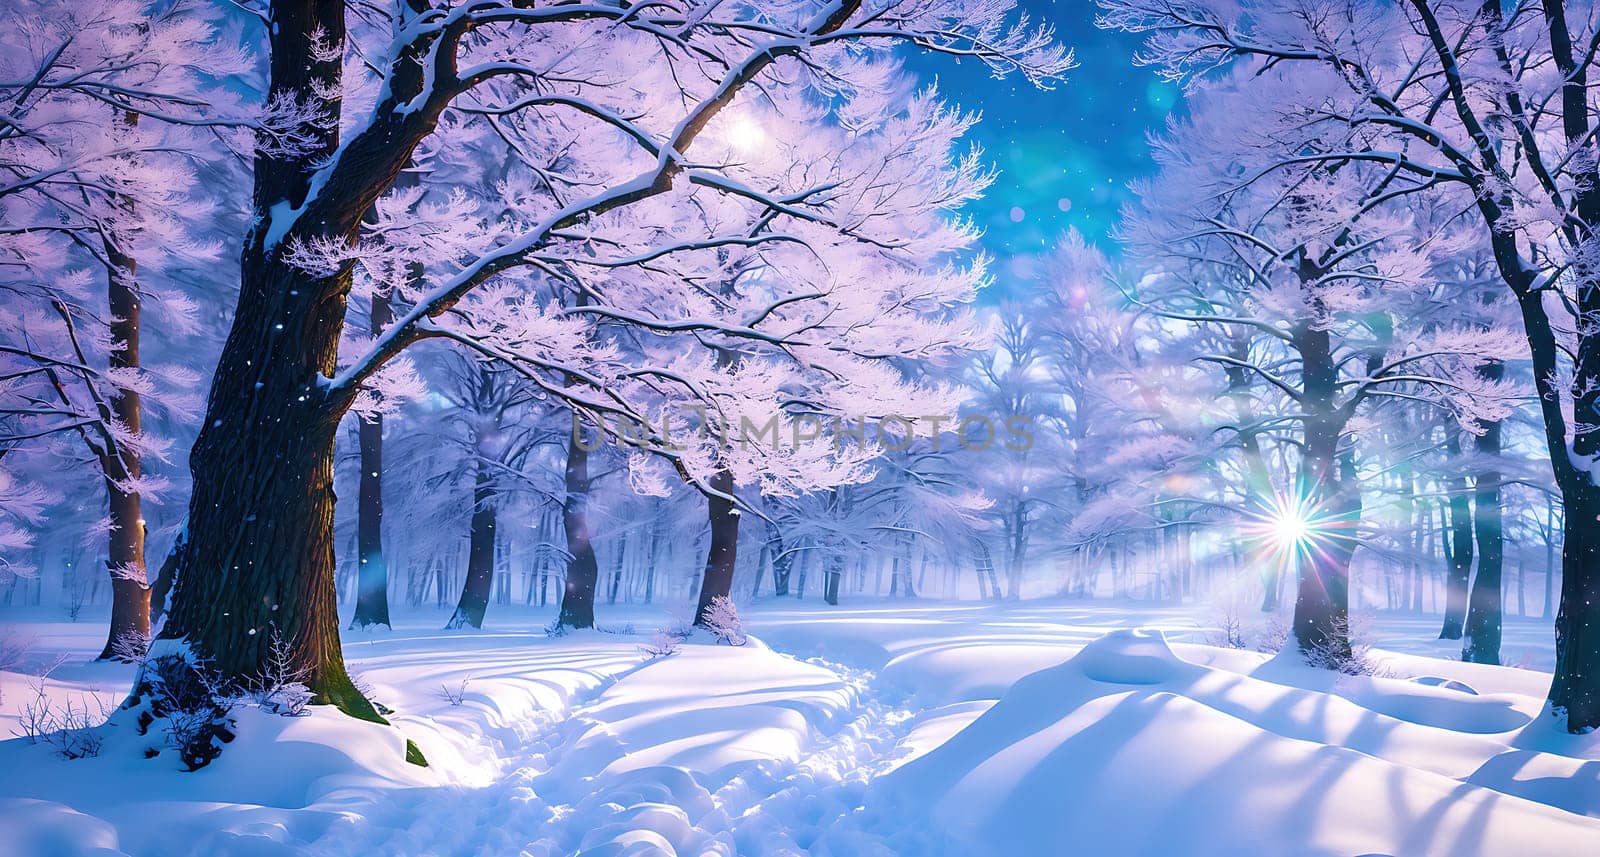 The image depicts a winter scene with snow covered trees and a path leading through the woods.